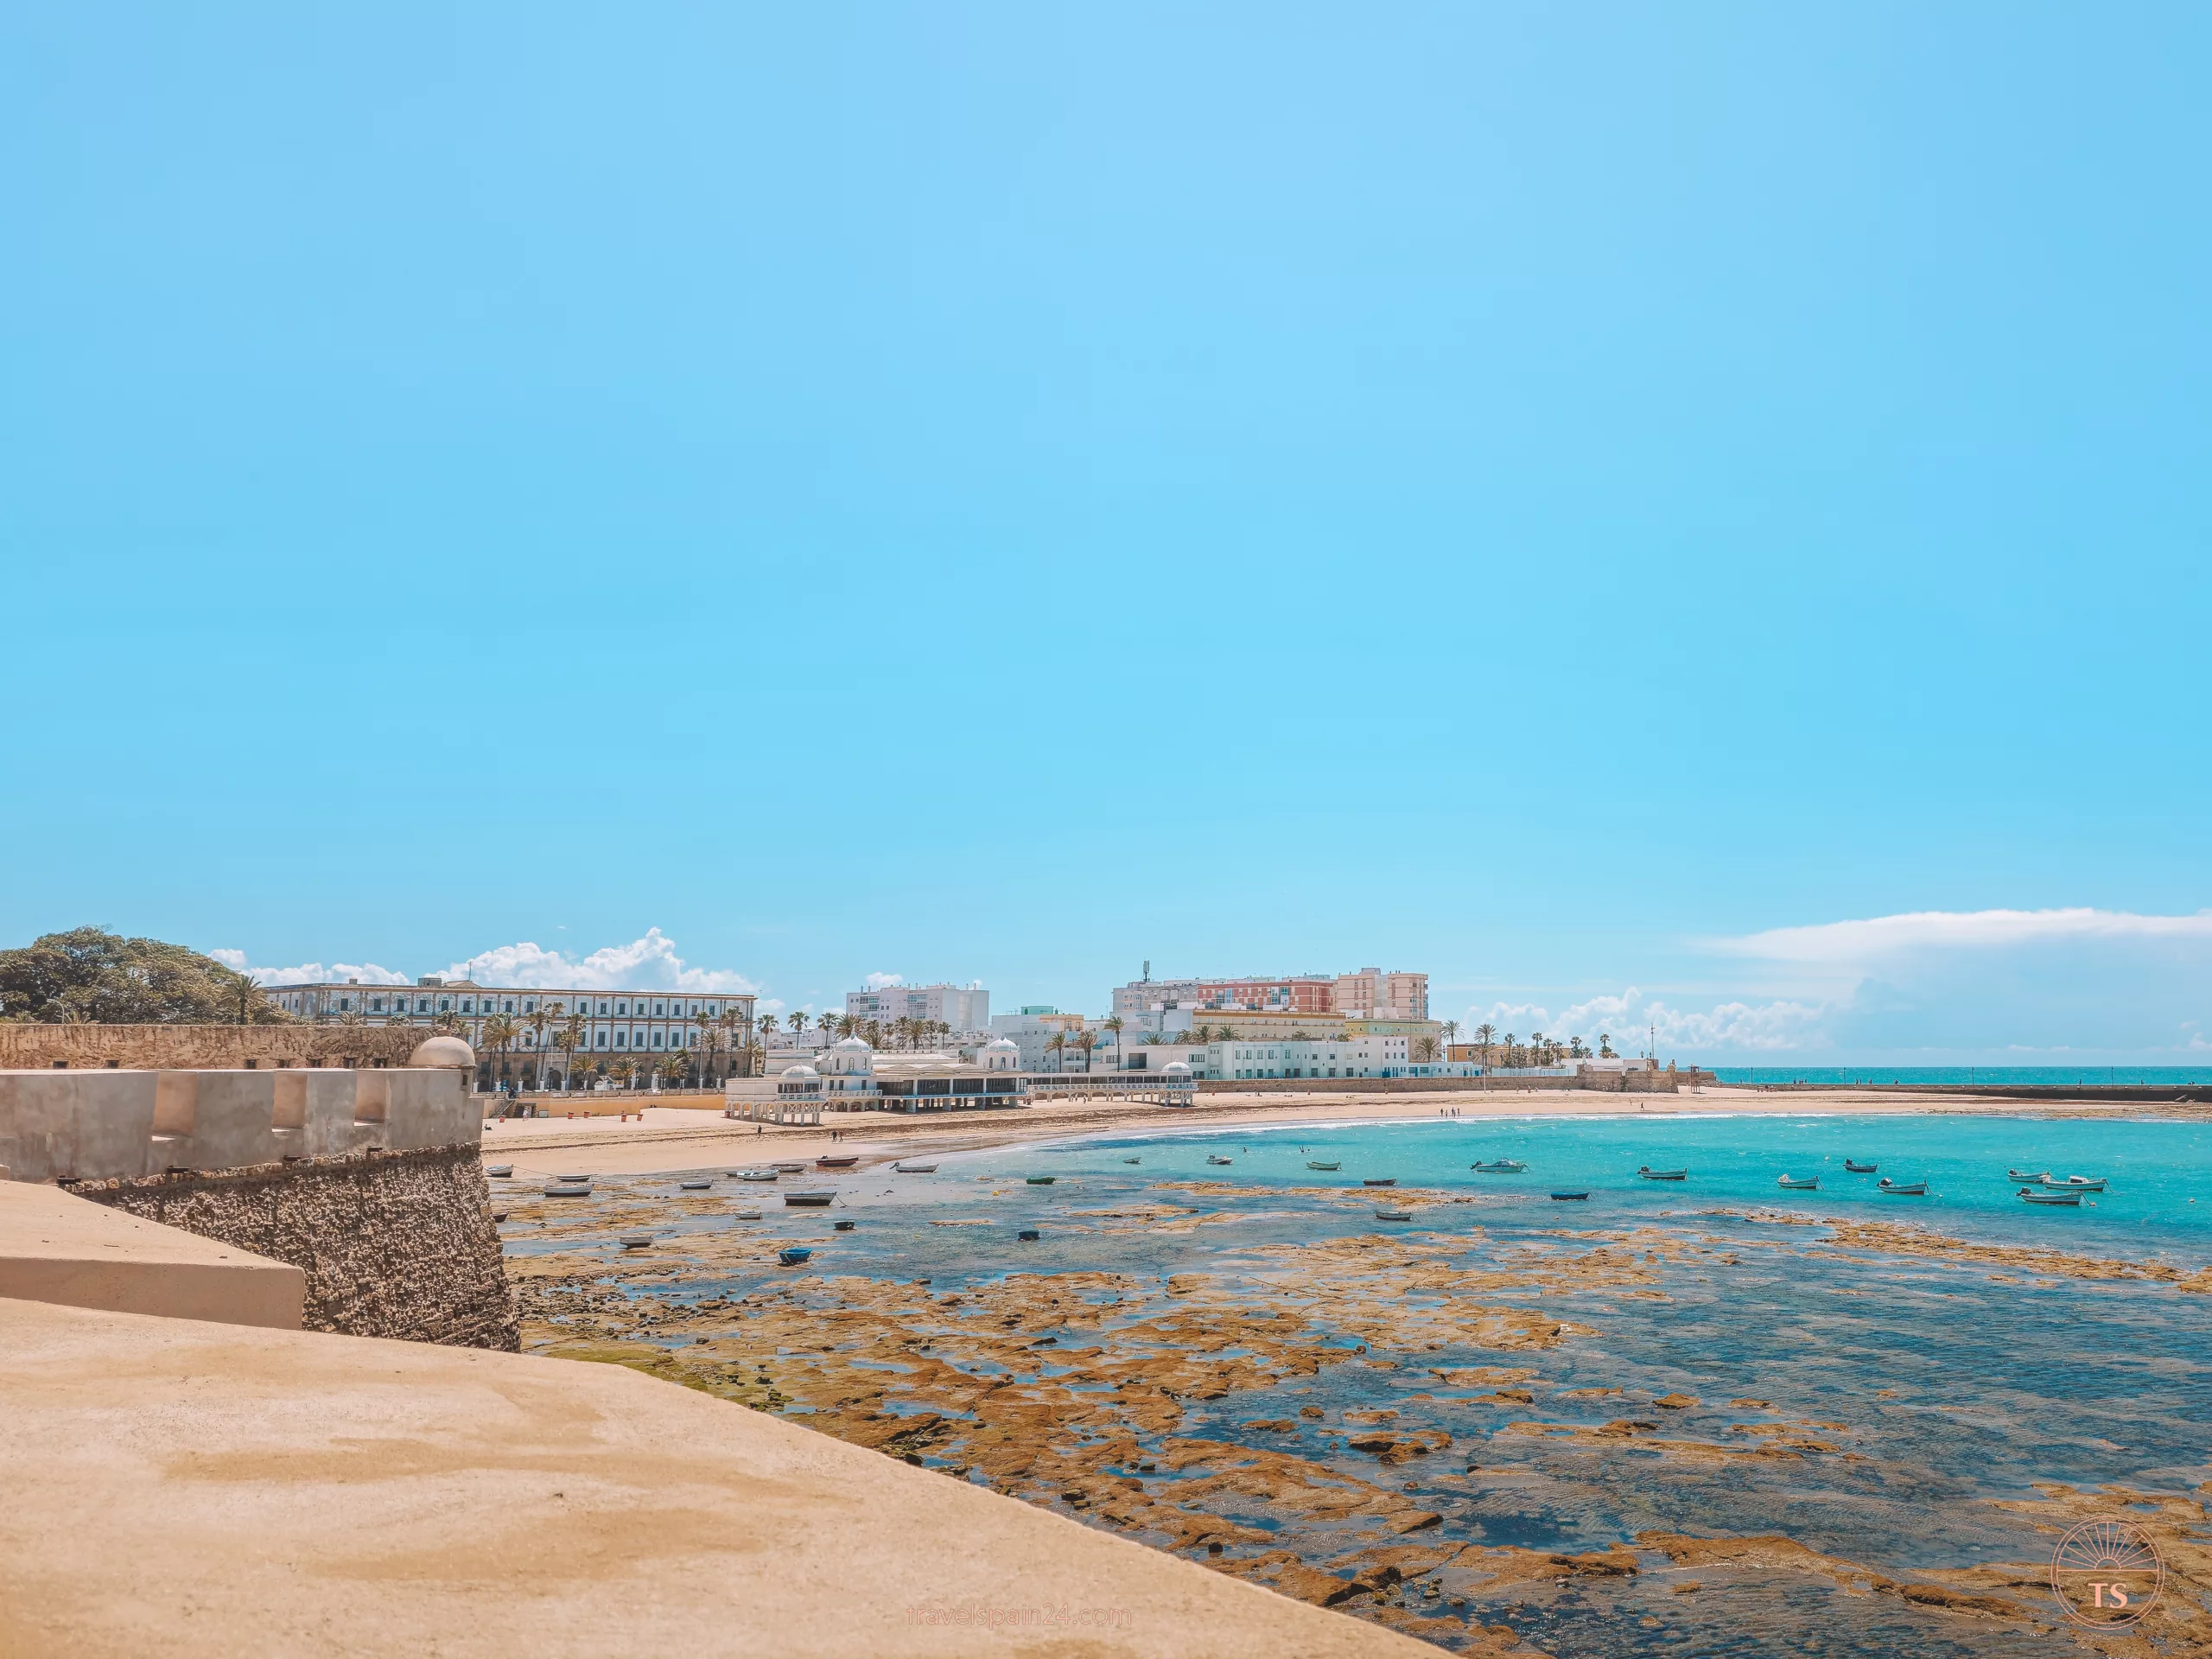 View of Caleta Beach from the castle in Cadiz, including Balneario de Nuestra Señora de la Palma y del Real. This perspective is one of the Cadiz highlights, capturing the scenic beauty and historical landmarks of the coastline.
